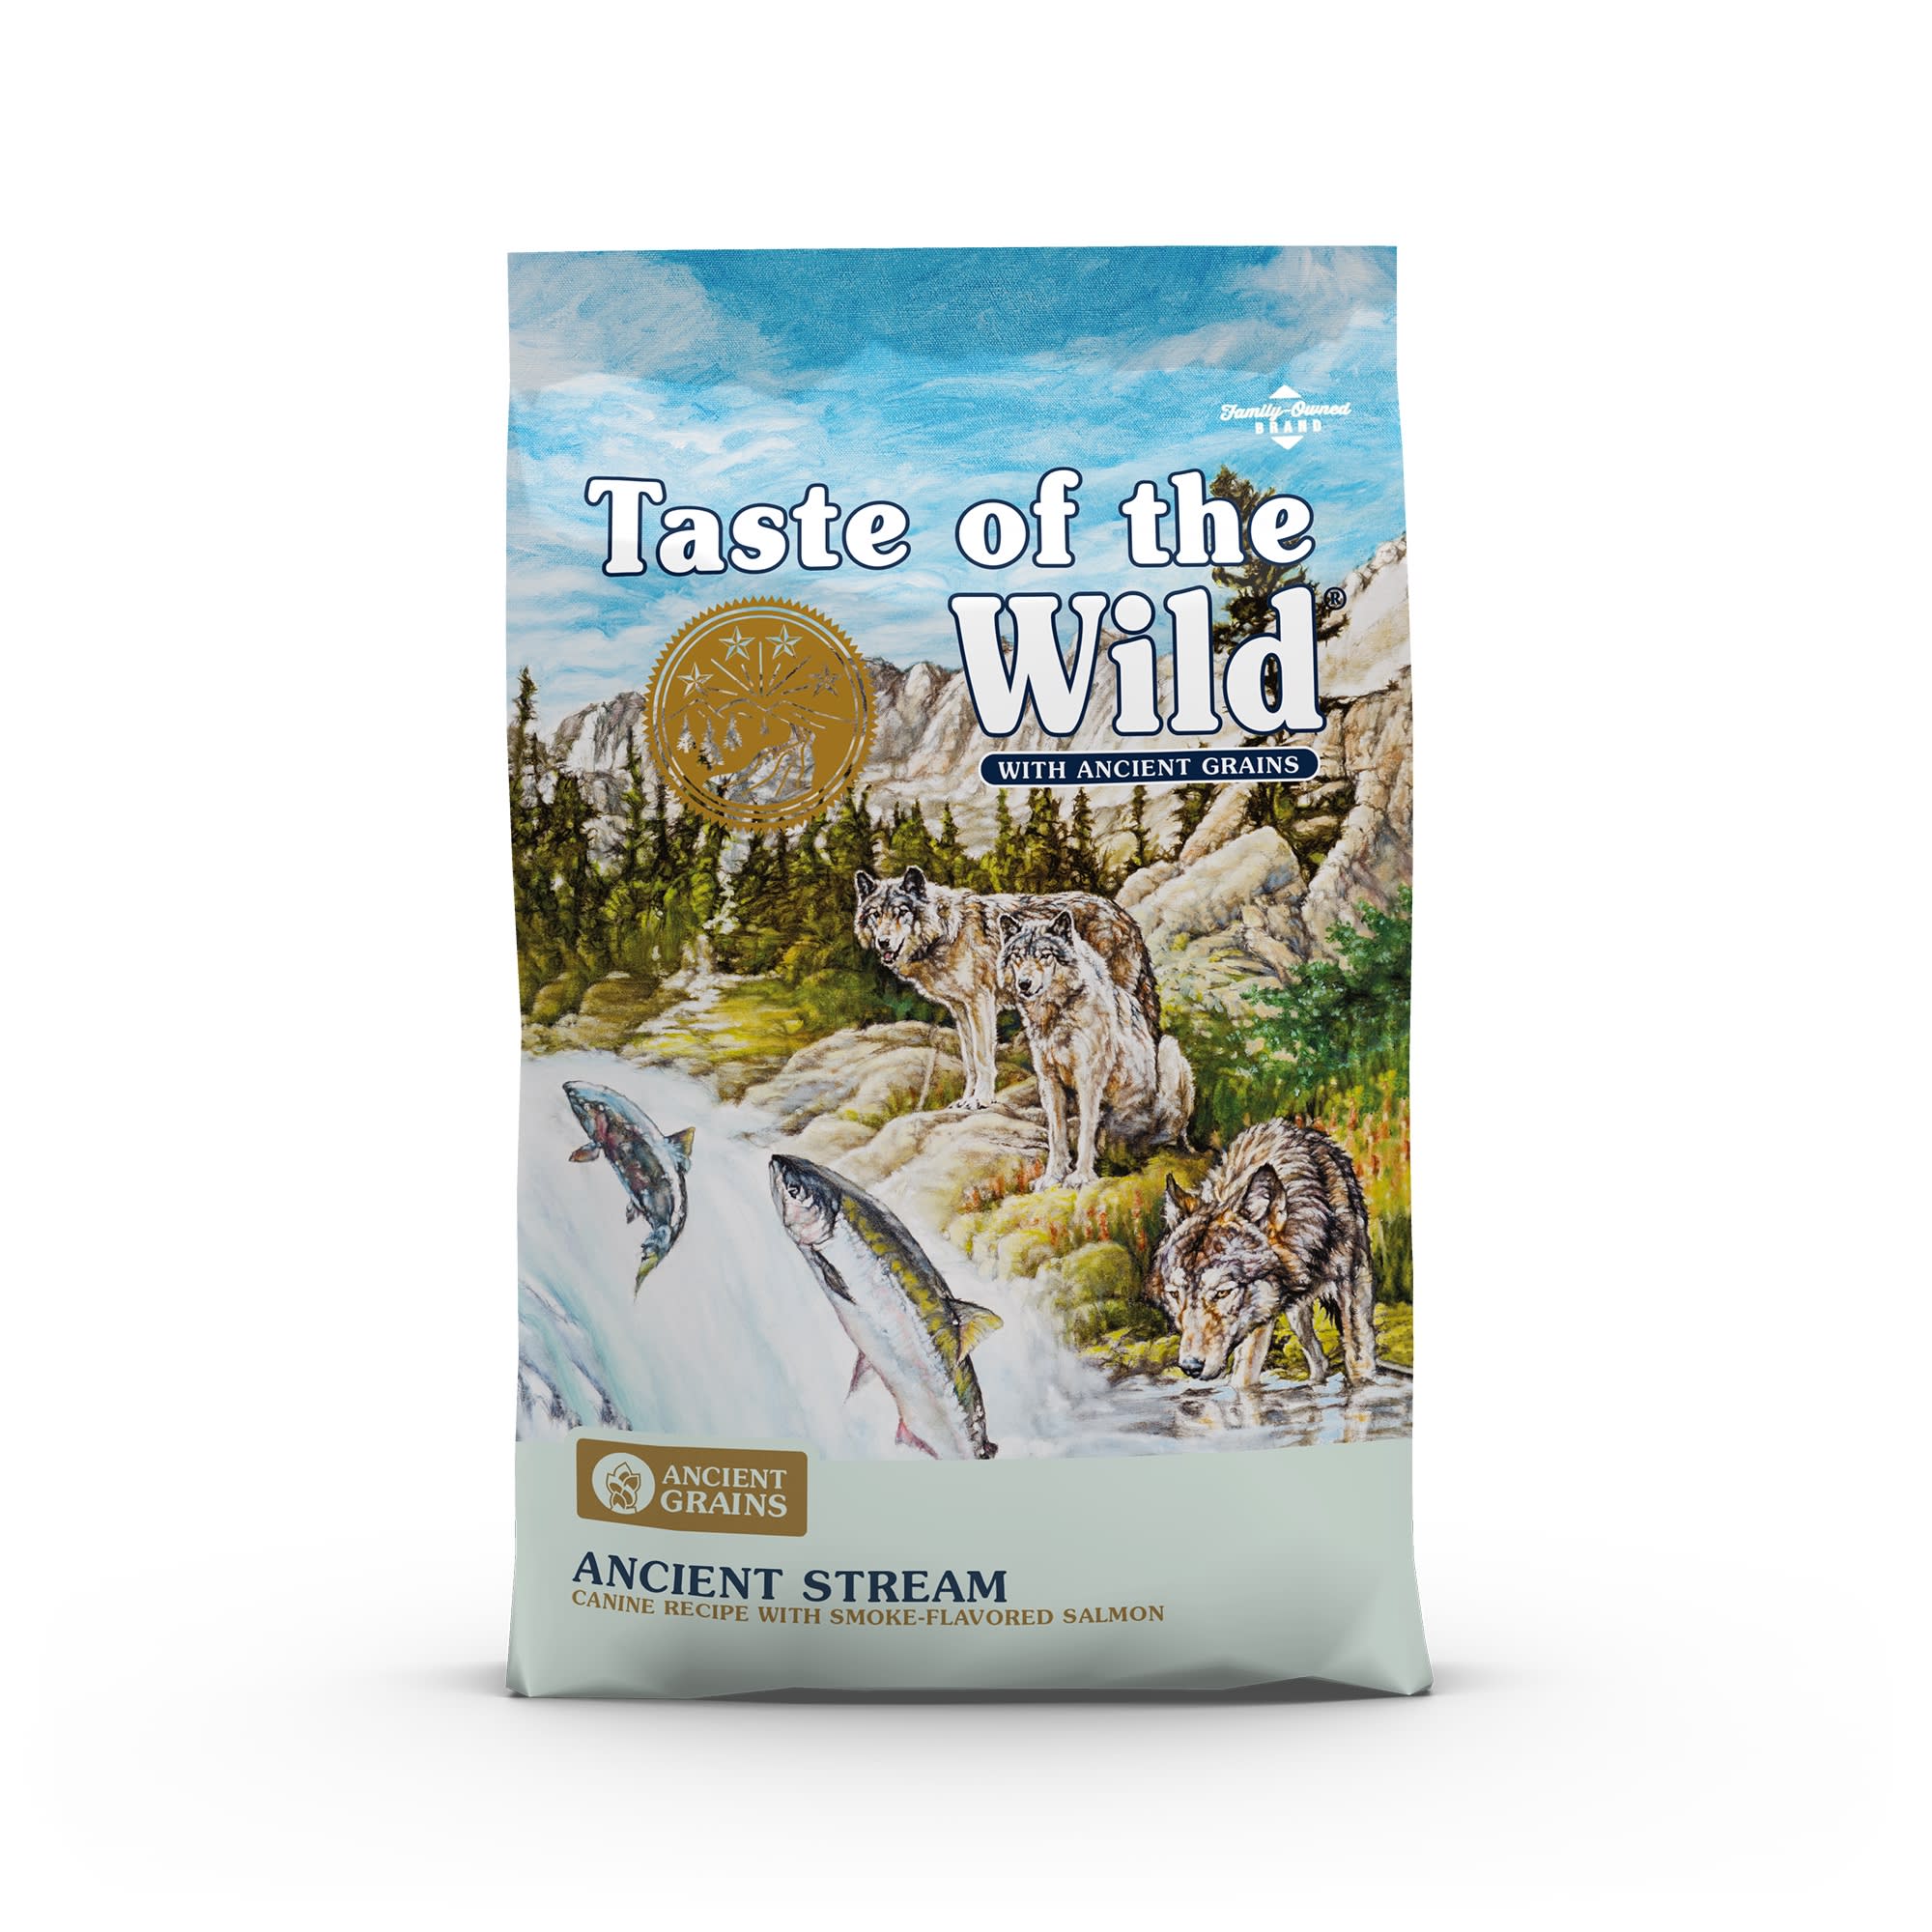 Taste of the Wild Ancient Stream with Smoked Salmon and Ancient Grains Dry Dog Food, 14 lbs.